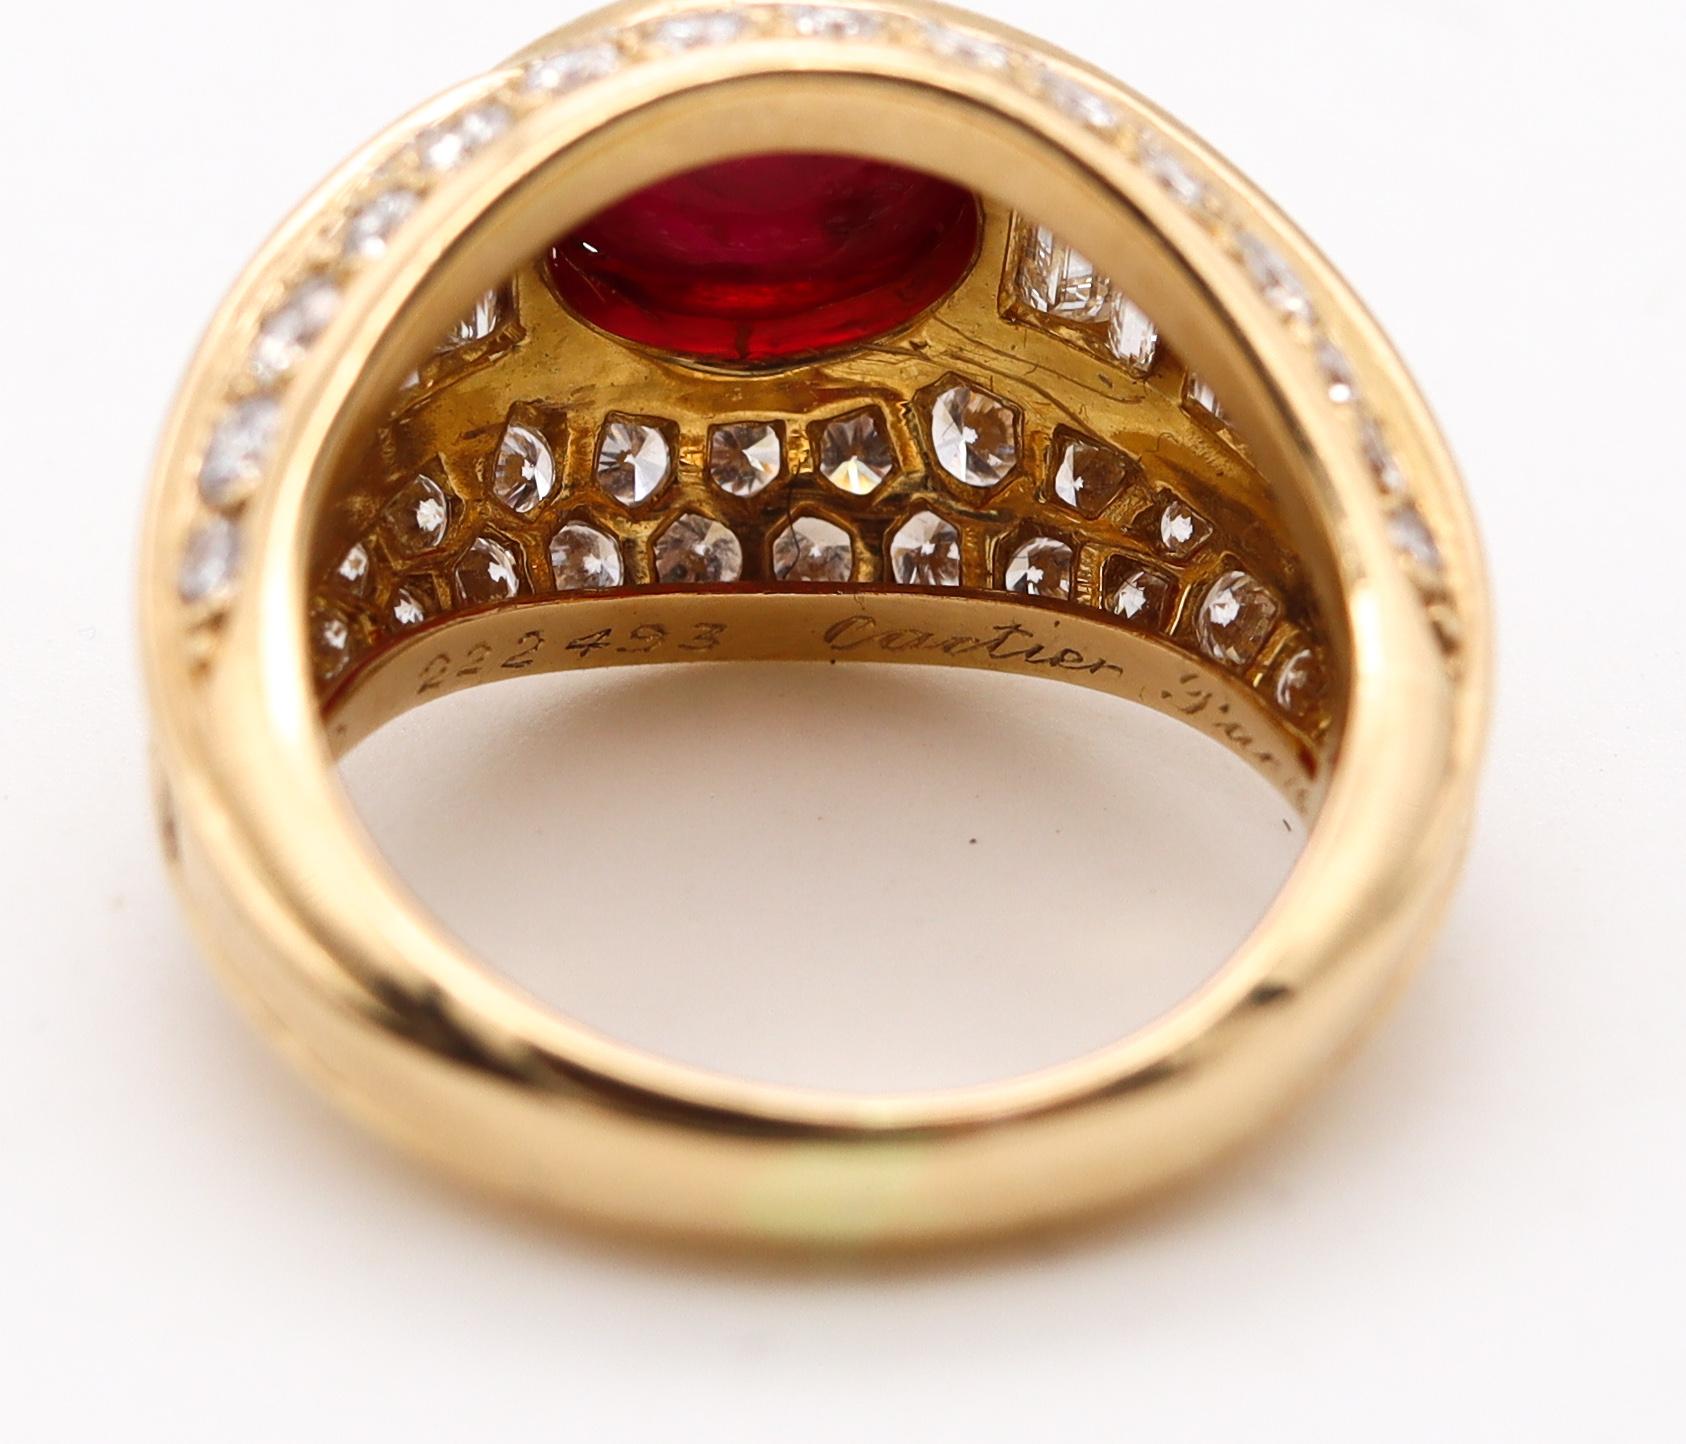 Mixed Cut Cartier Paris Cocktail Ring in 18Kt Yellow Gold 4.49 Cts Burmese Ruby Diamonds